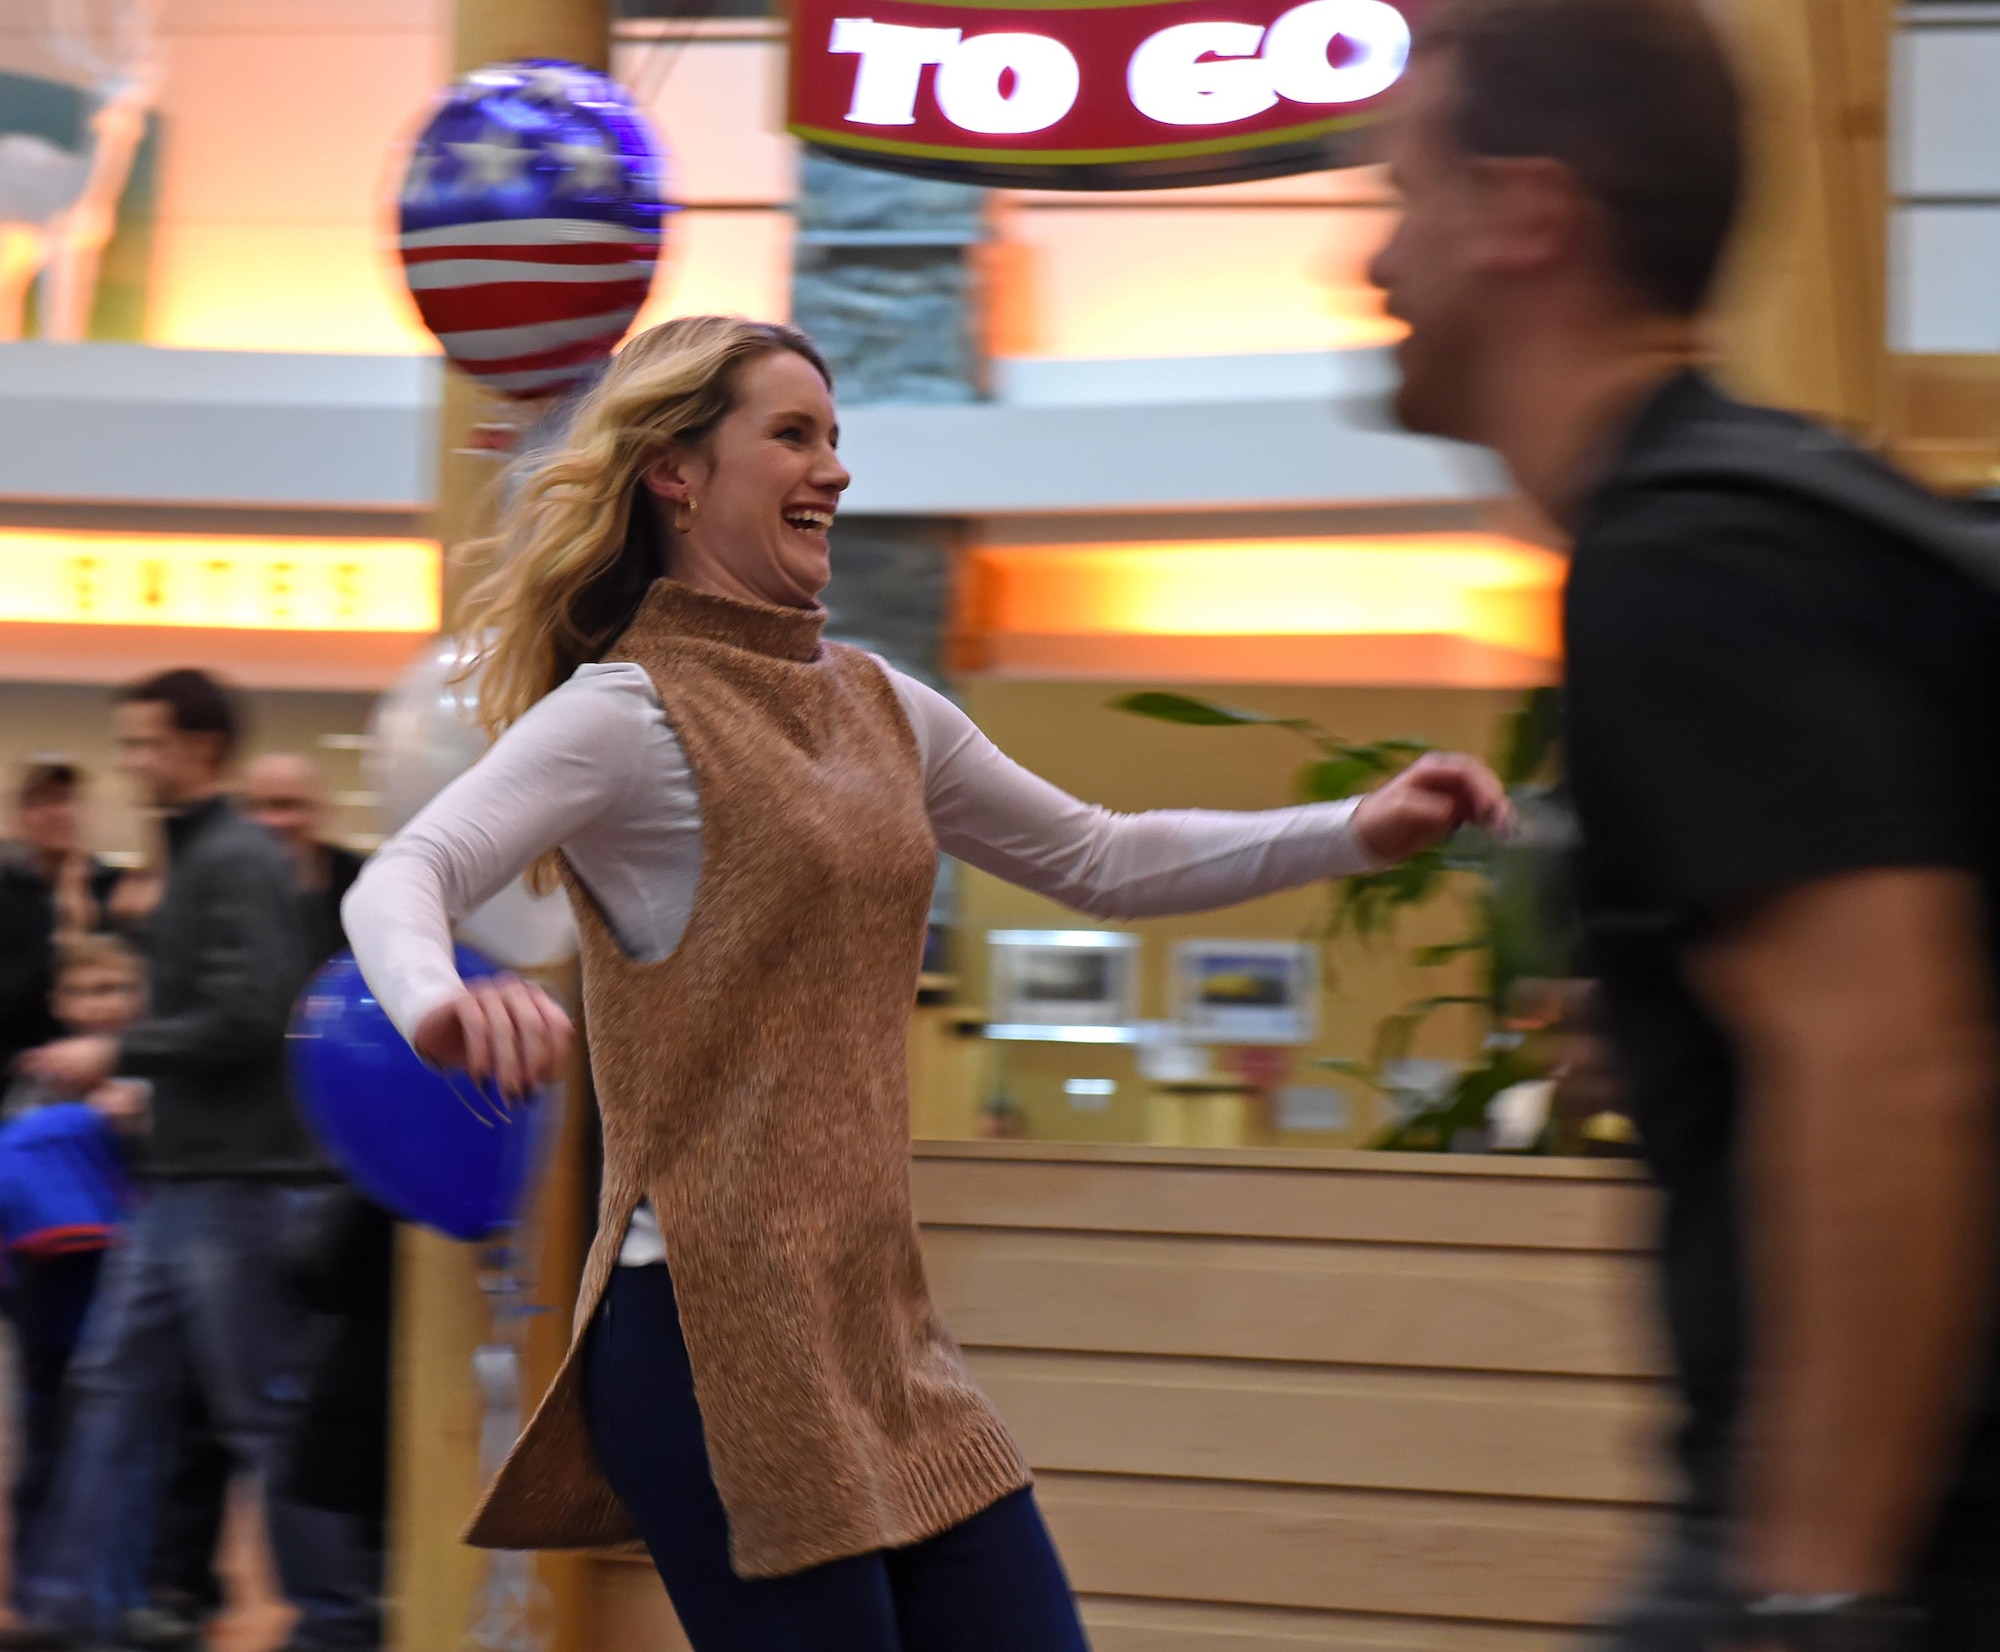 Charlotte Autrey runs toward her spouse who has returned from a deployment at the Ted Stevens International Airport, Anchorage, Alaska, Jan. 13, 2017. Airmen of the 302d Fighter Squadron and the 525th Fighter Squadron returned from a deployment to Southwest Asia. 